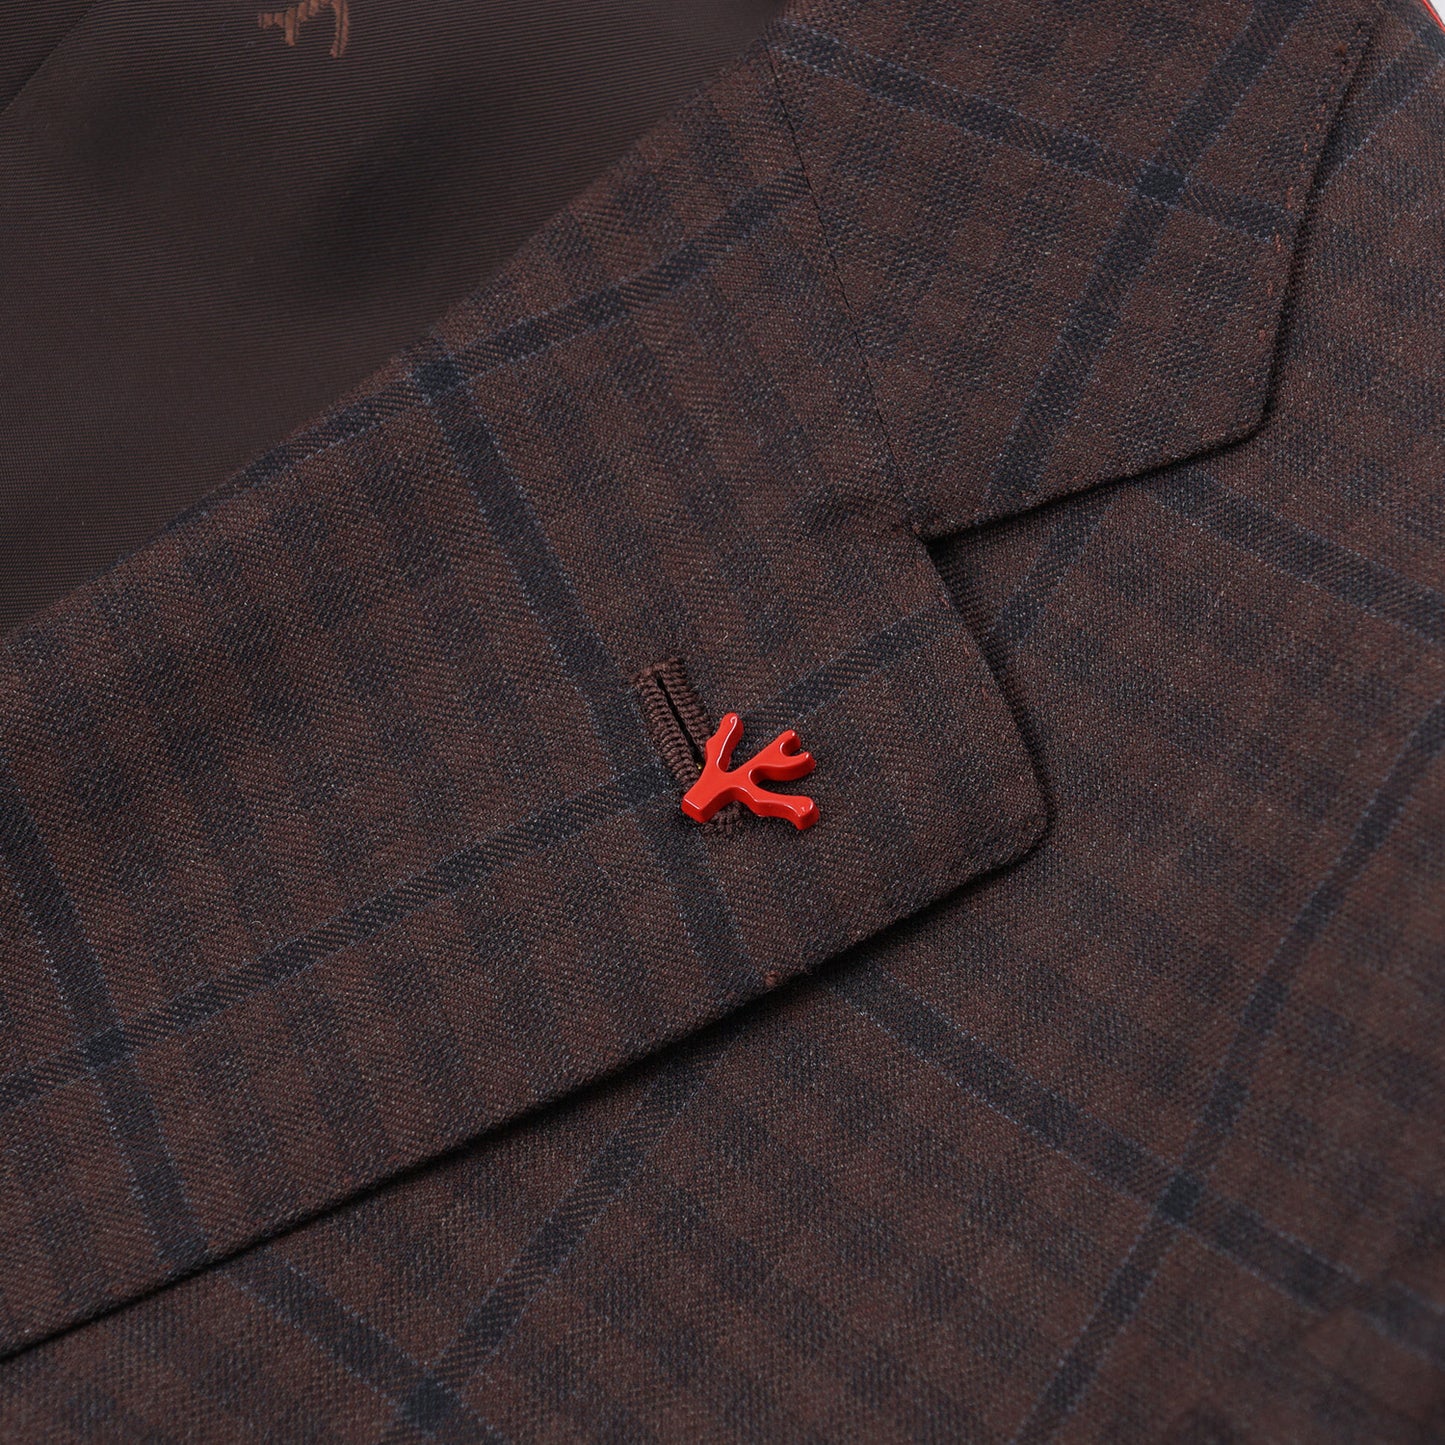 Isaia Layered Check 140s Wool Suit - Top Shelf Apparel